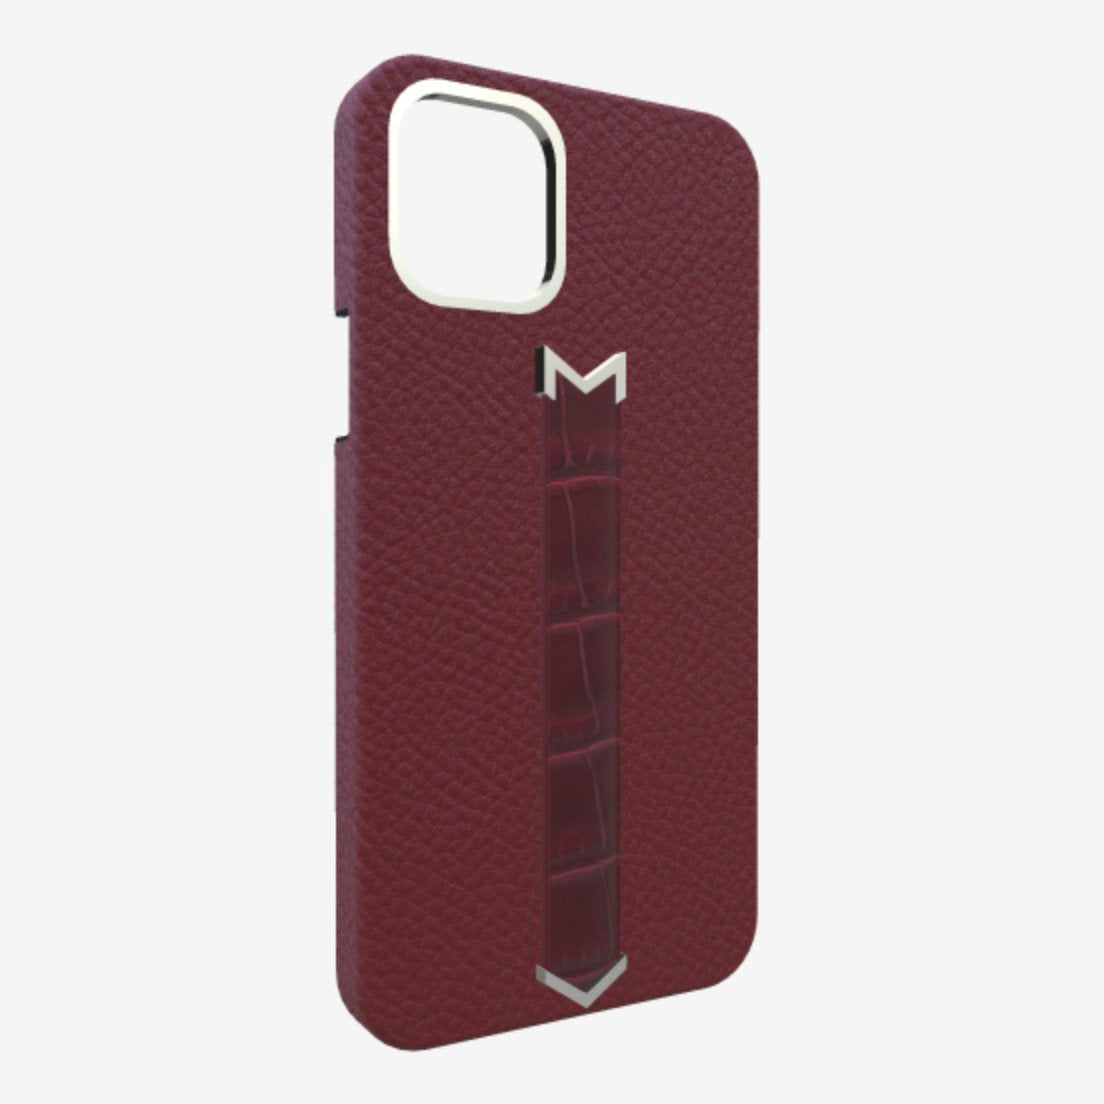 Silver Finger Strap Case for iPhone 13 Pro in Genuine Calfskin and Alligator Burgundy-Palace Burgundy-Palace 